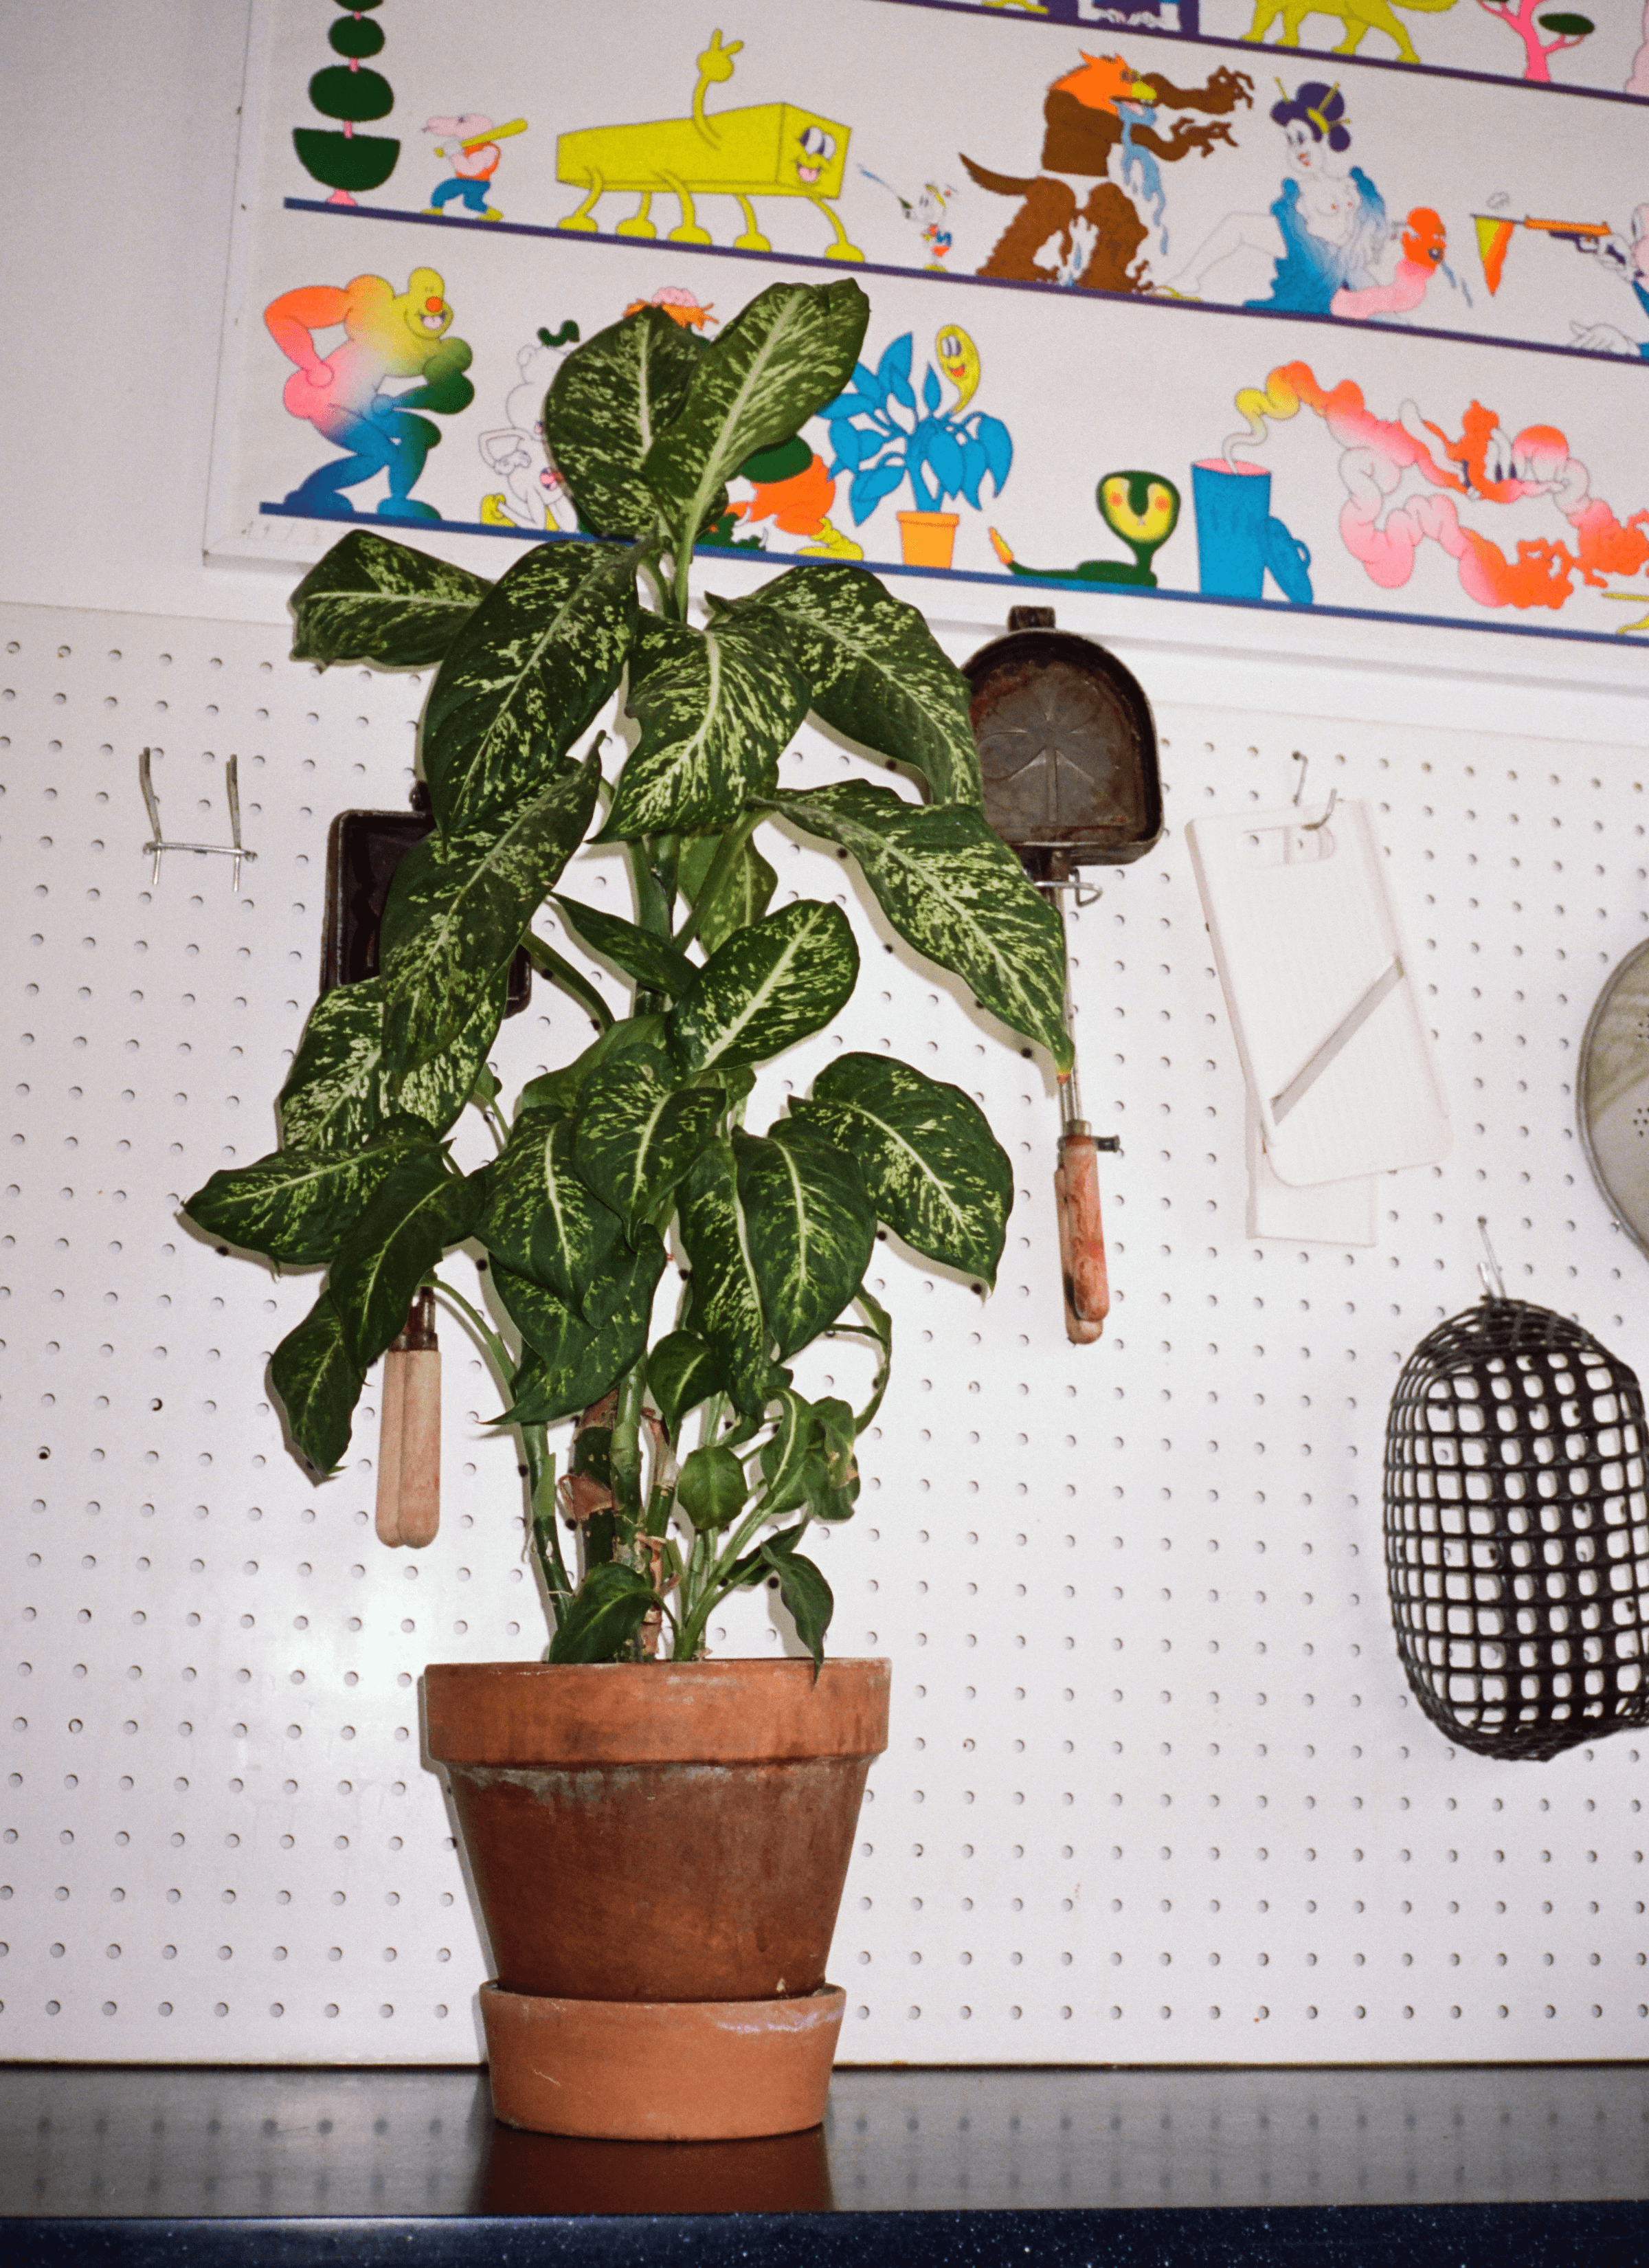 A pot of Dieffenbachia seguine (Dumb cane plant) grows in a terracotta pot. In their background, there are a couple of tools hung on the wall and a colourful piece of art.